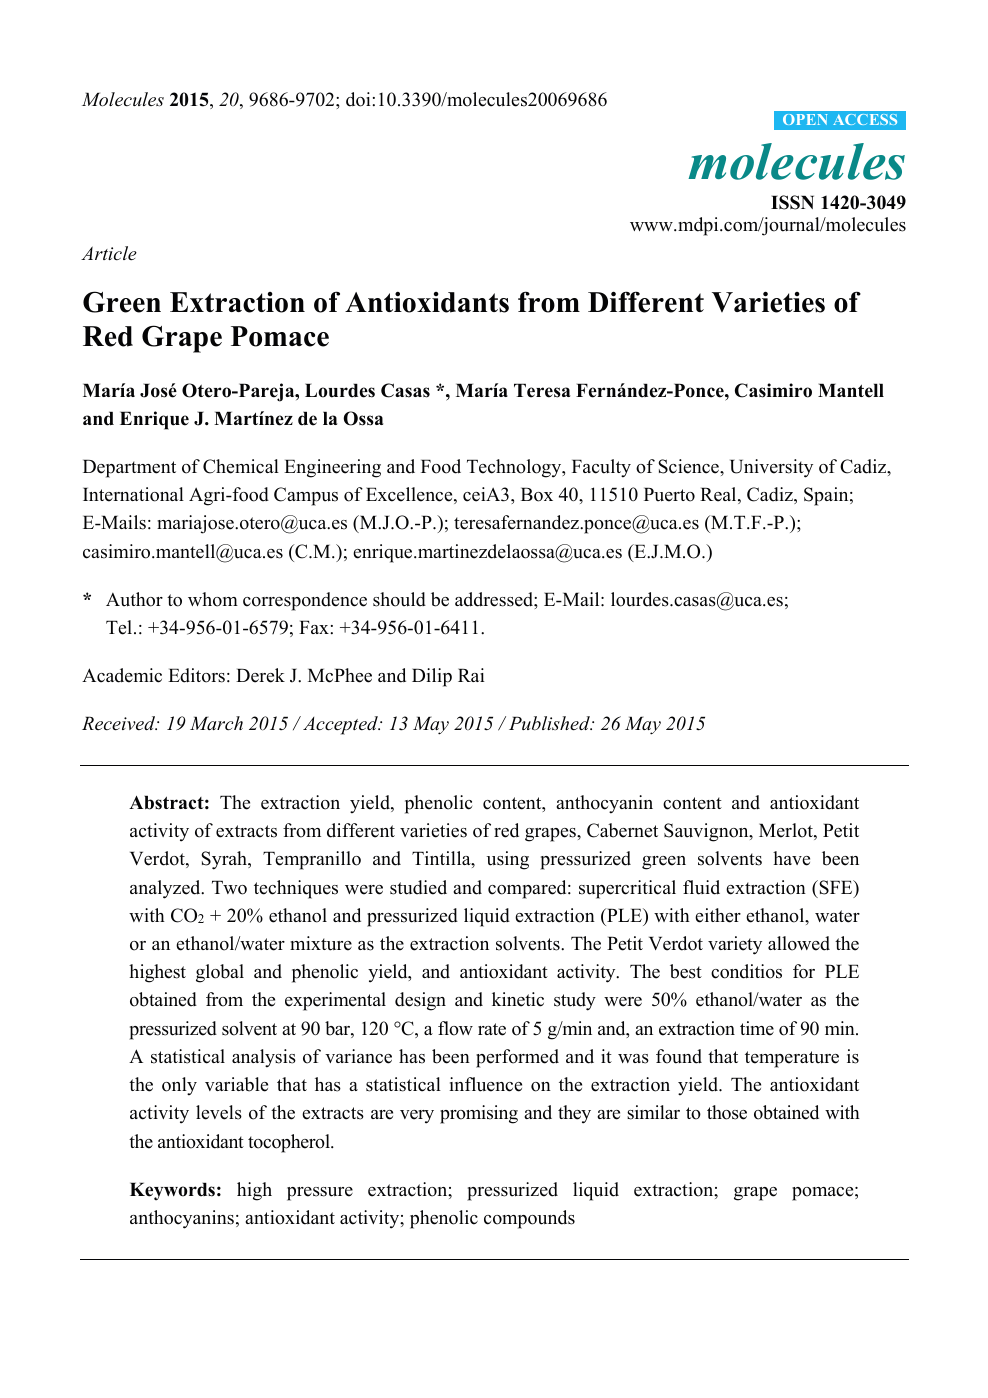 Green Extraction Of Antioxidants From Different Varieties Of Red Grape Pomace Topic Of Research Paper In Chemical Sciences Download Scholarly Article Pdf And Read For Free On Cyberleninka Open Science Hub